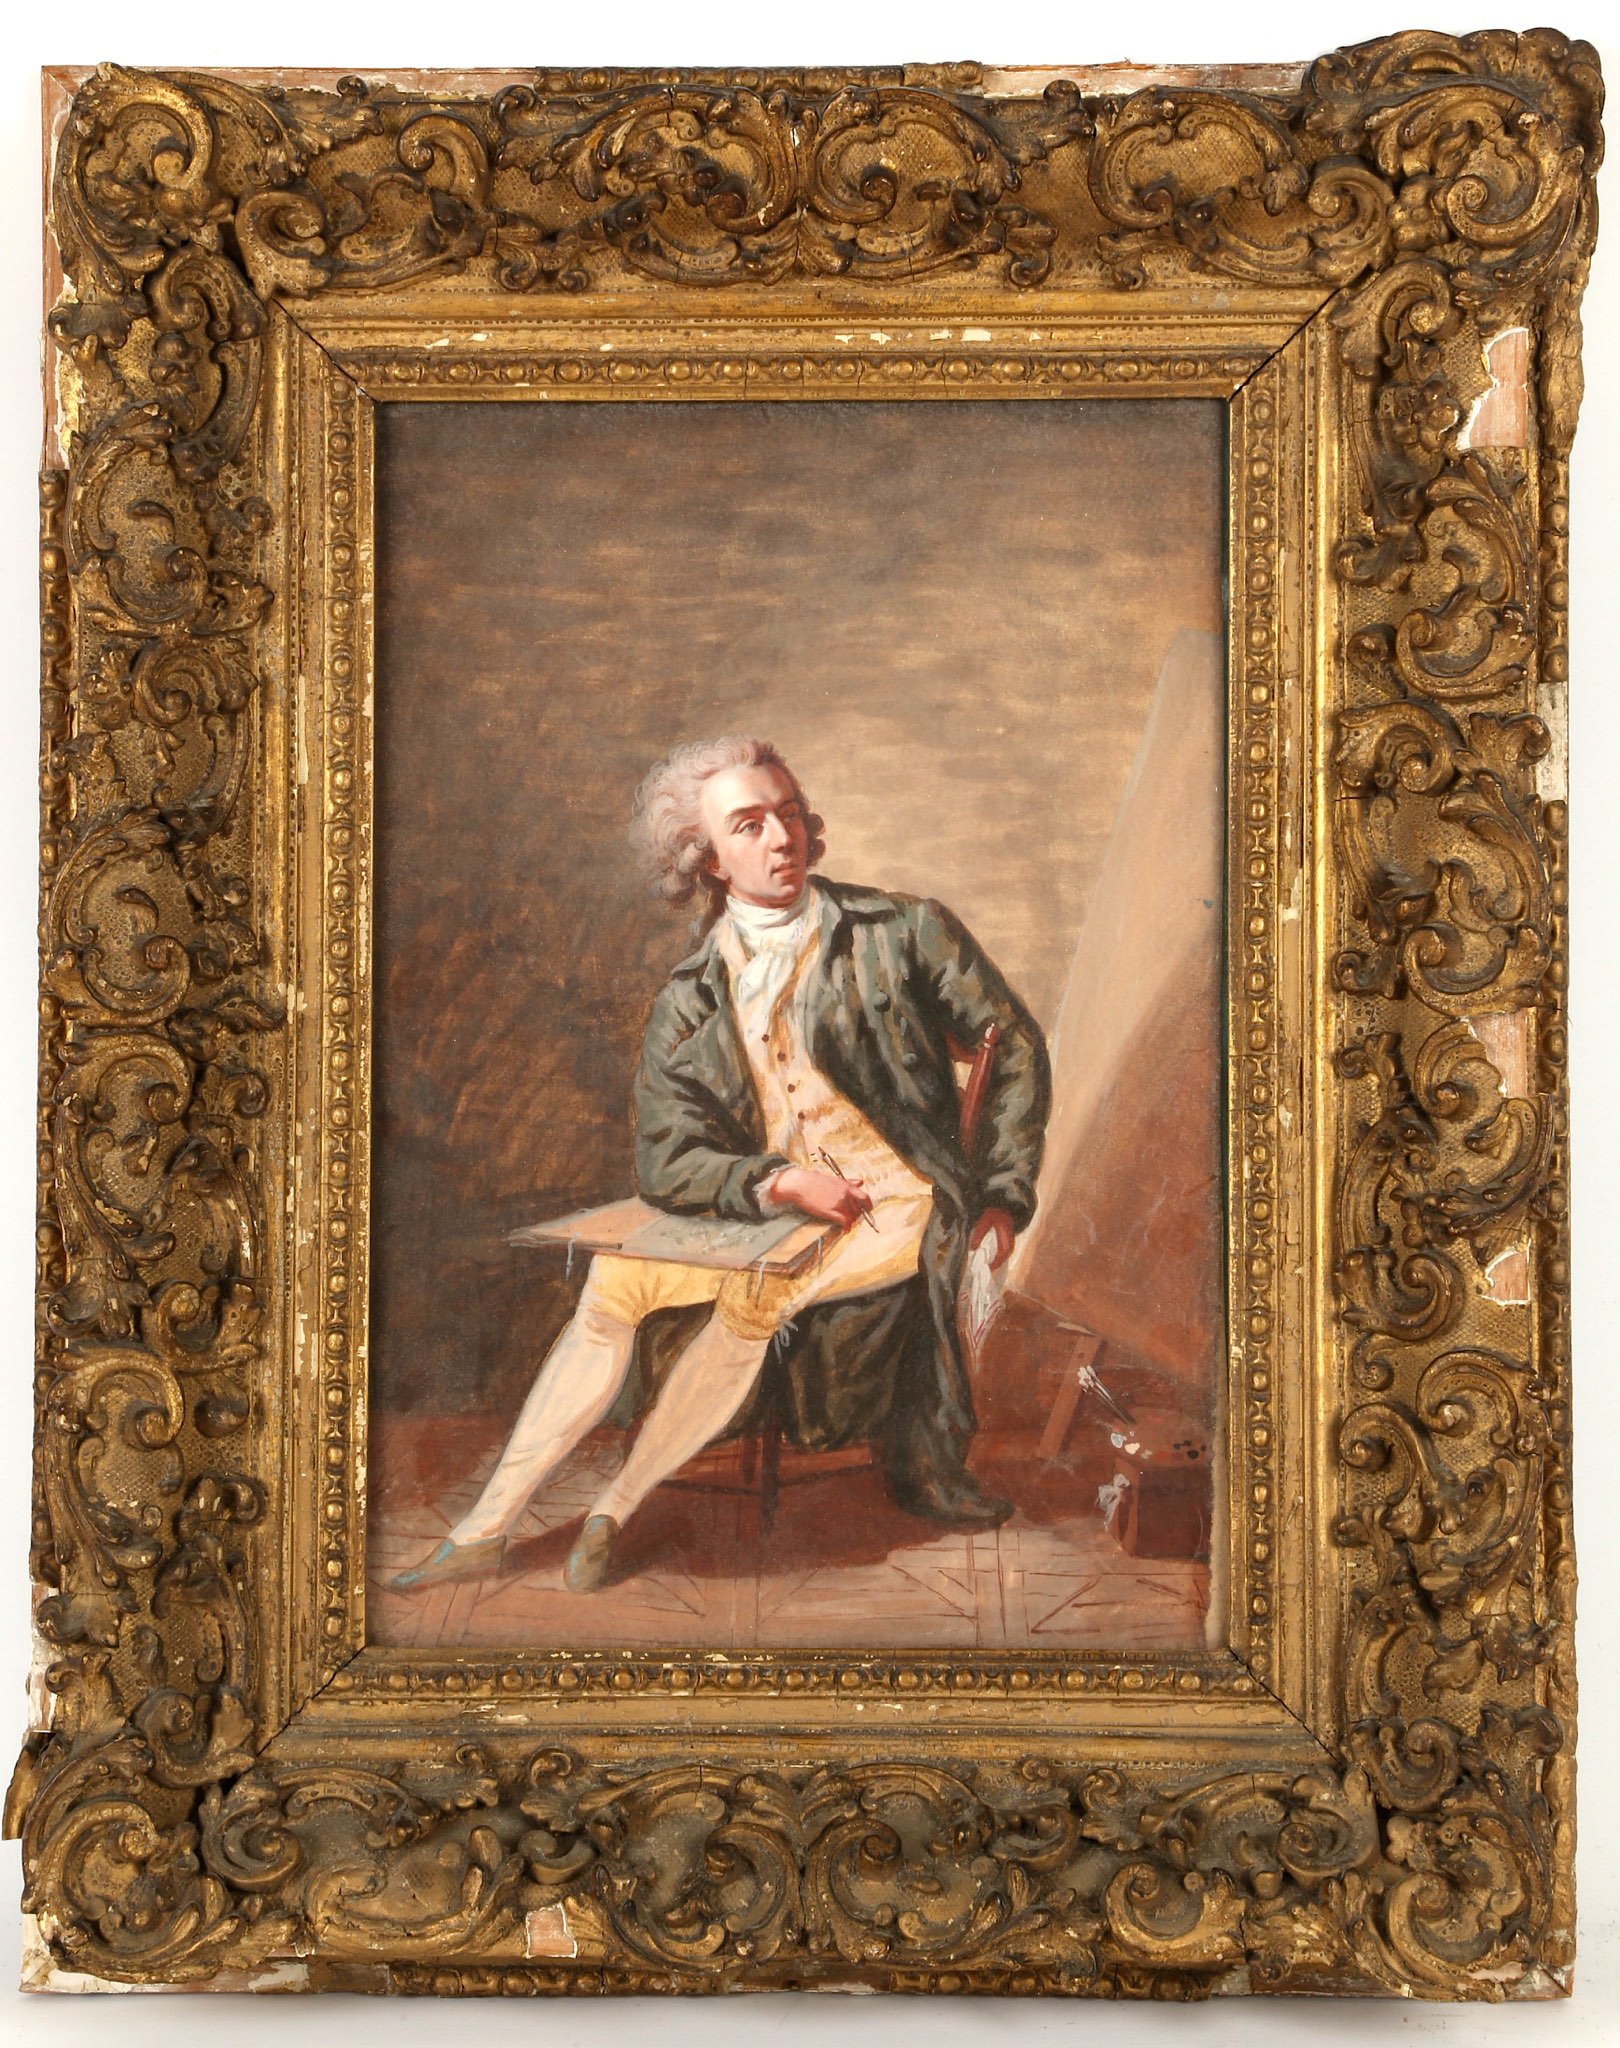 Late 18th century French School, 'Portrait of an Artist'. Gouache and watercolour study of a